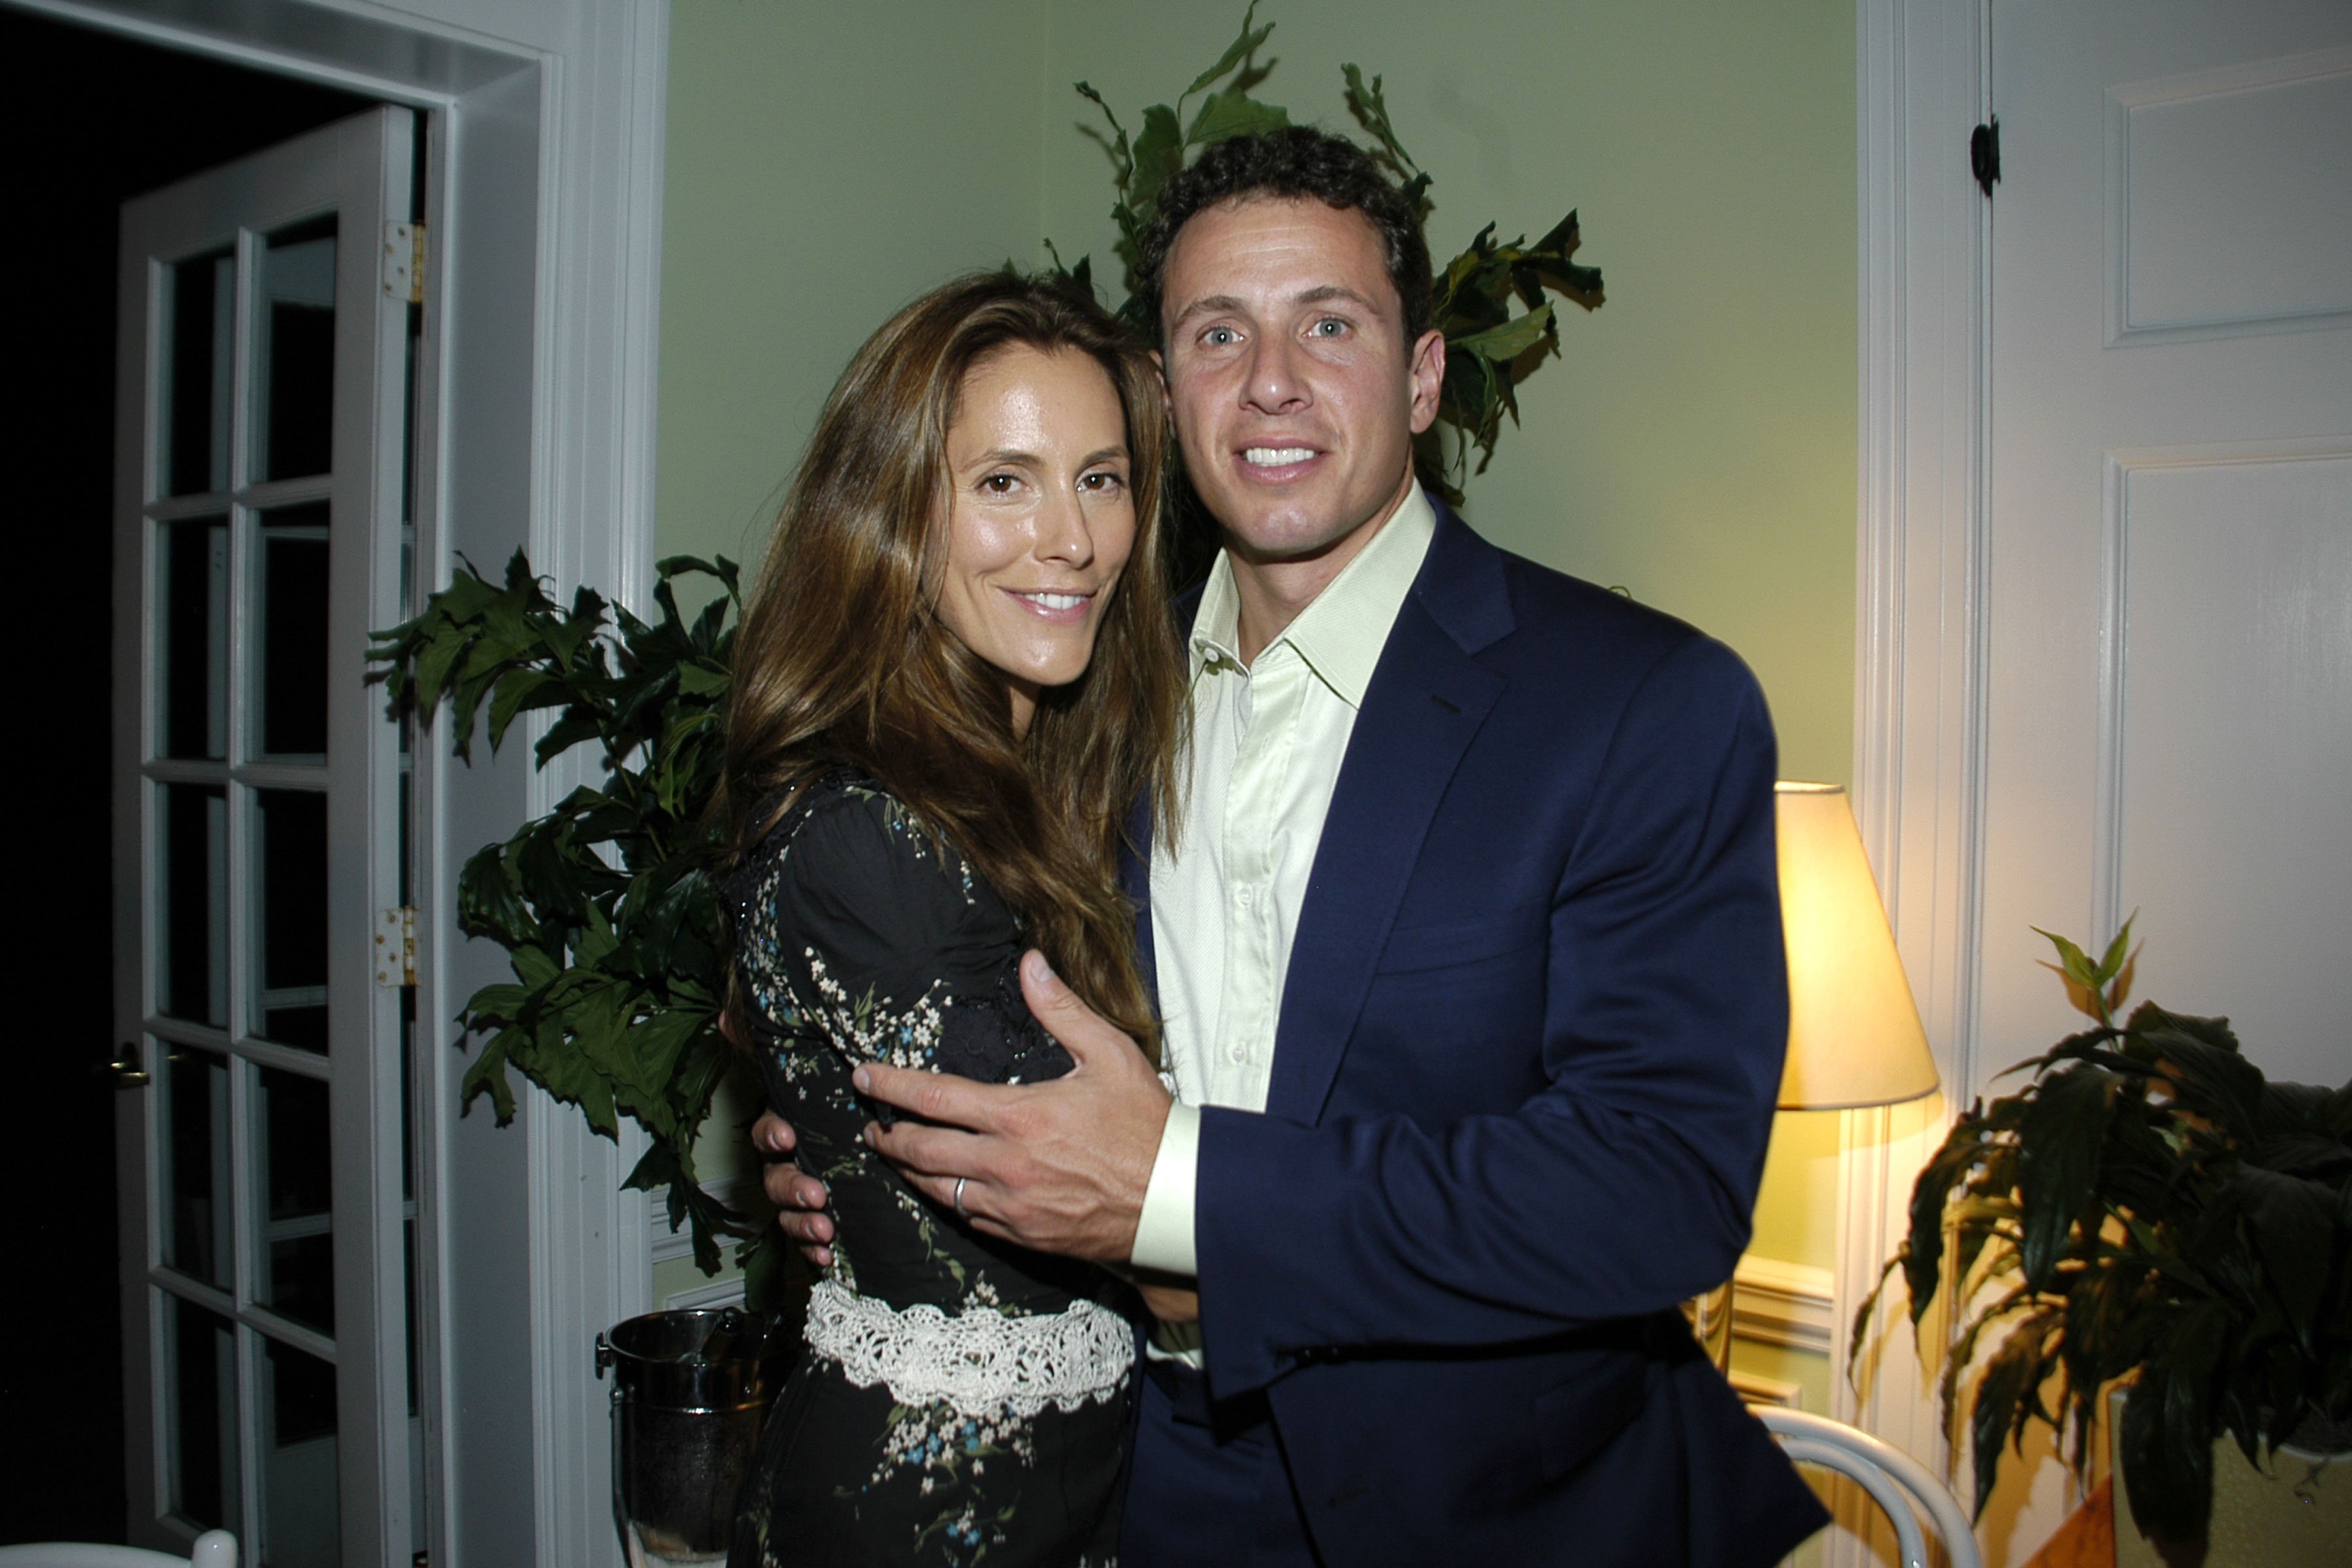 Cristina Greeven Cuomo and Chris Cuomo attend NATURA BISSE Dinner at Private Club on August 17, 2007 | Photo: GettyImages